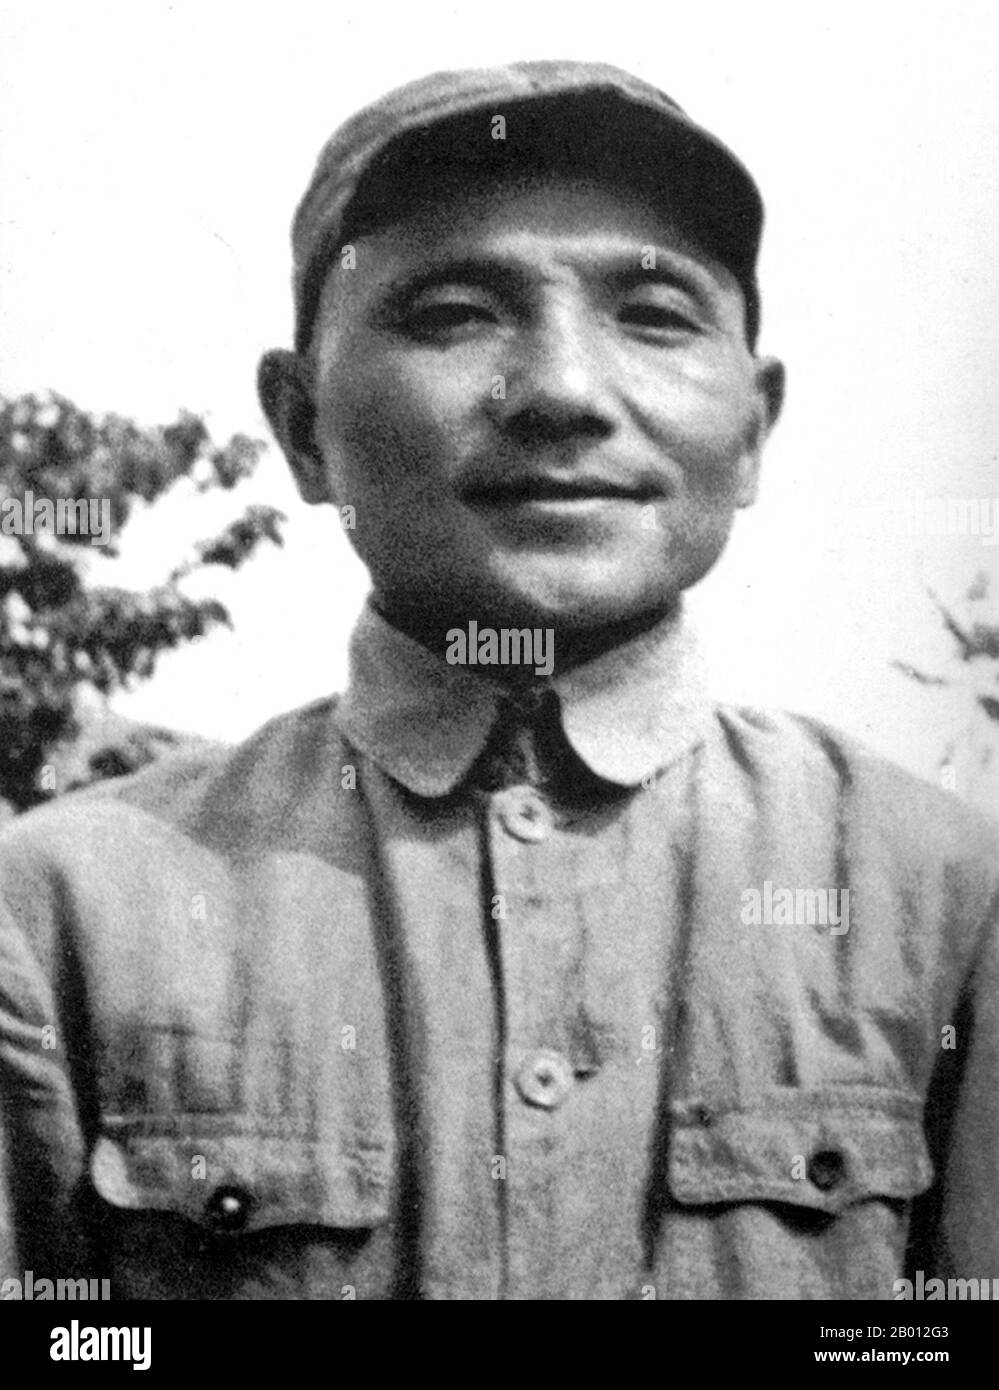 China: Deng Xiaoping (Teng Hsiao-p'ing, 1904-1997) in Yan'an (Yenan) c. 1936.  Deng Xiaoping (Teng Hsiao-p'ing; 22 August 1904  – 19 February 1997) was a Chinese politician, statesman, theorist, and diplomat. As leader of the Communist Party of China, Deng was a reformer who led China towards a market economy. While Deng never held office as the head of state, head of government or General Secretary of the Communist Party of China (historically the highest position in Communist China), he nonetheless served as the paramount leader of the People's Republic of China from 1978 to 1992. Stock Photo